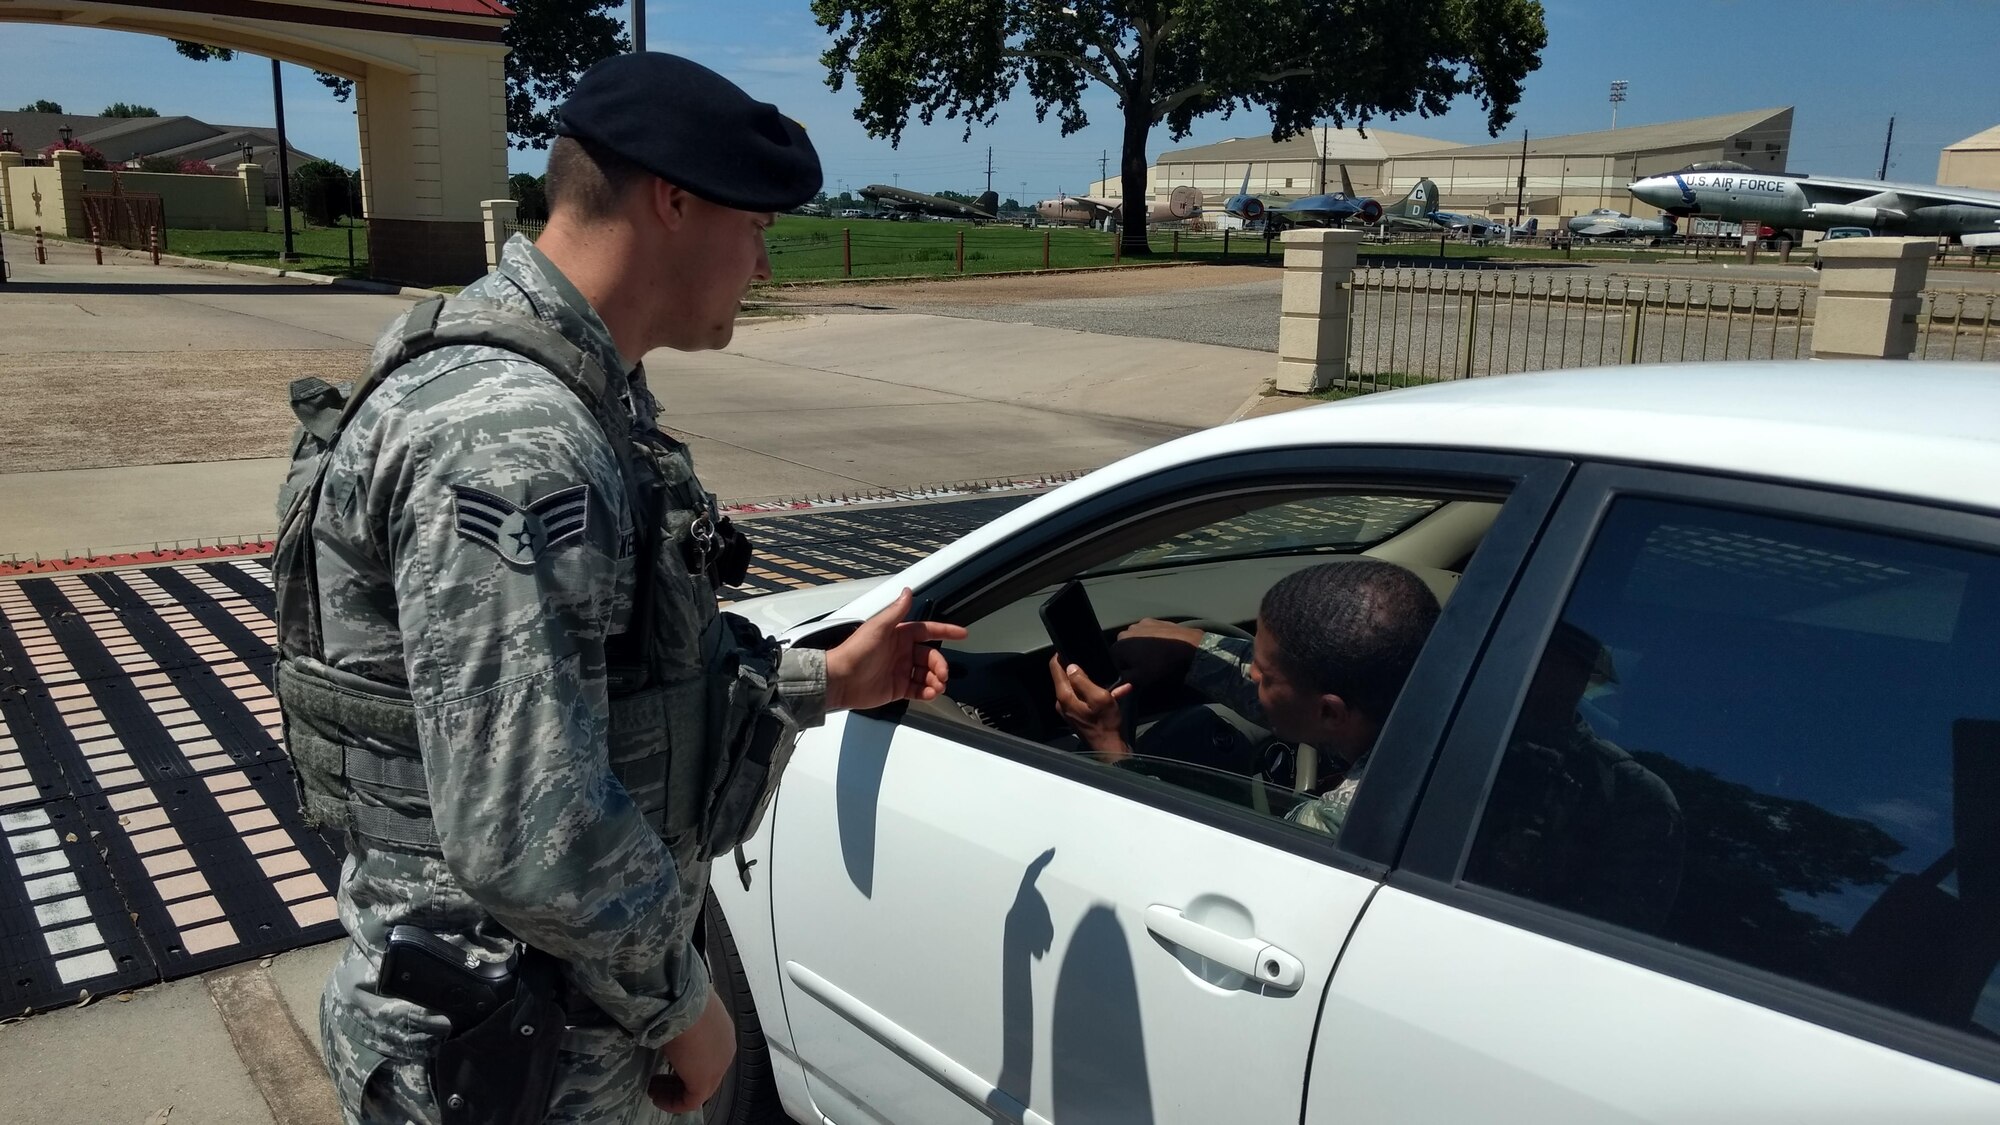 An Airman with the 2nd Security Forces Squadron speaks to a motorist at Barksdale Air Force Base, La., June 16, 2017. While smartphones have introduced a huge amount of convenience into our day-to-day routines, they have also introduced a new world of dangers being considered a major distraction for drivers. (U.S. Air Force Photo/ Nevardo Cayemitte)